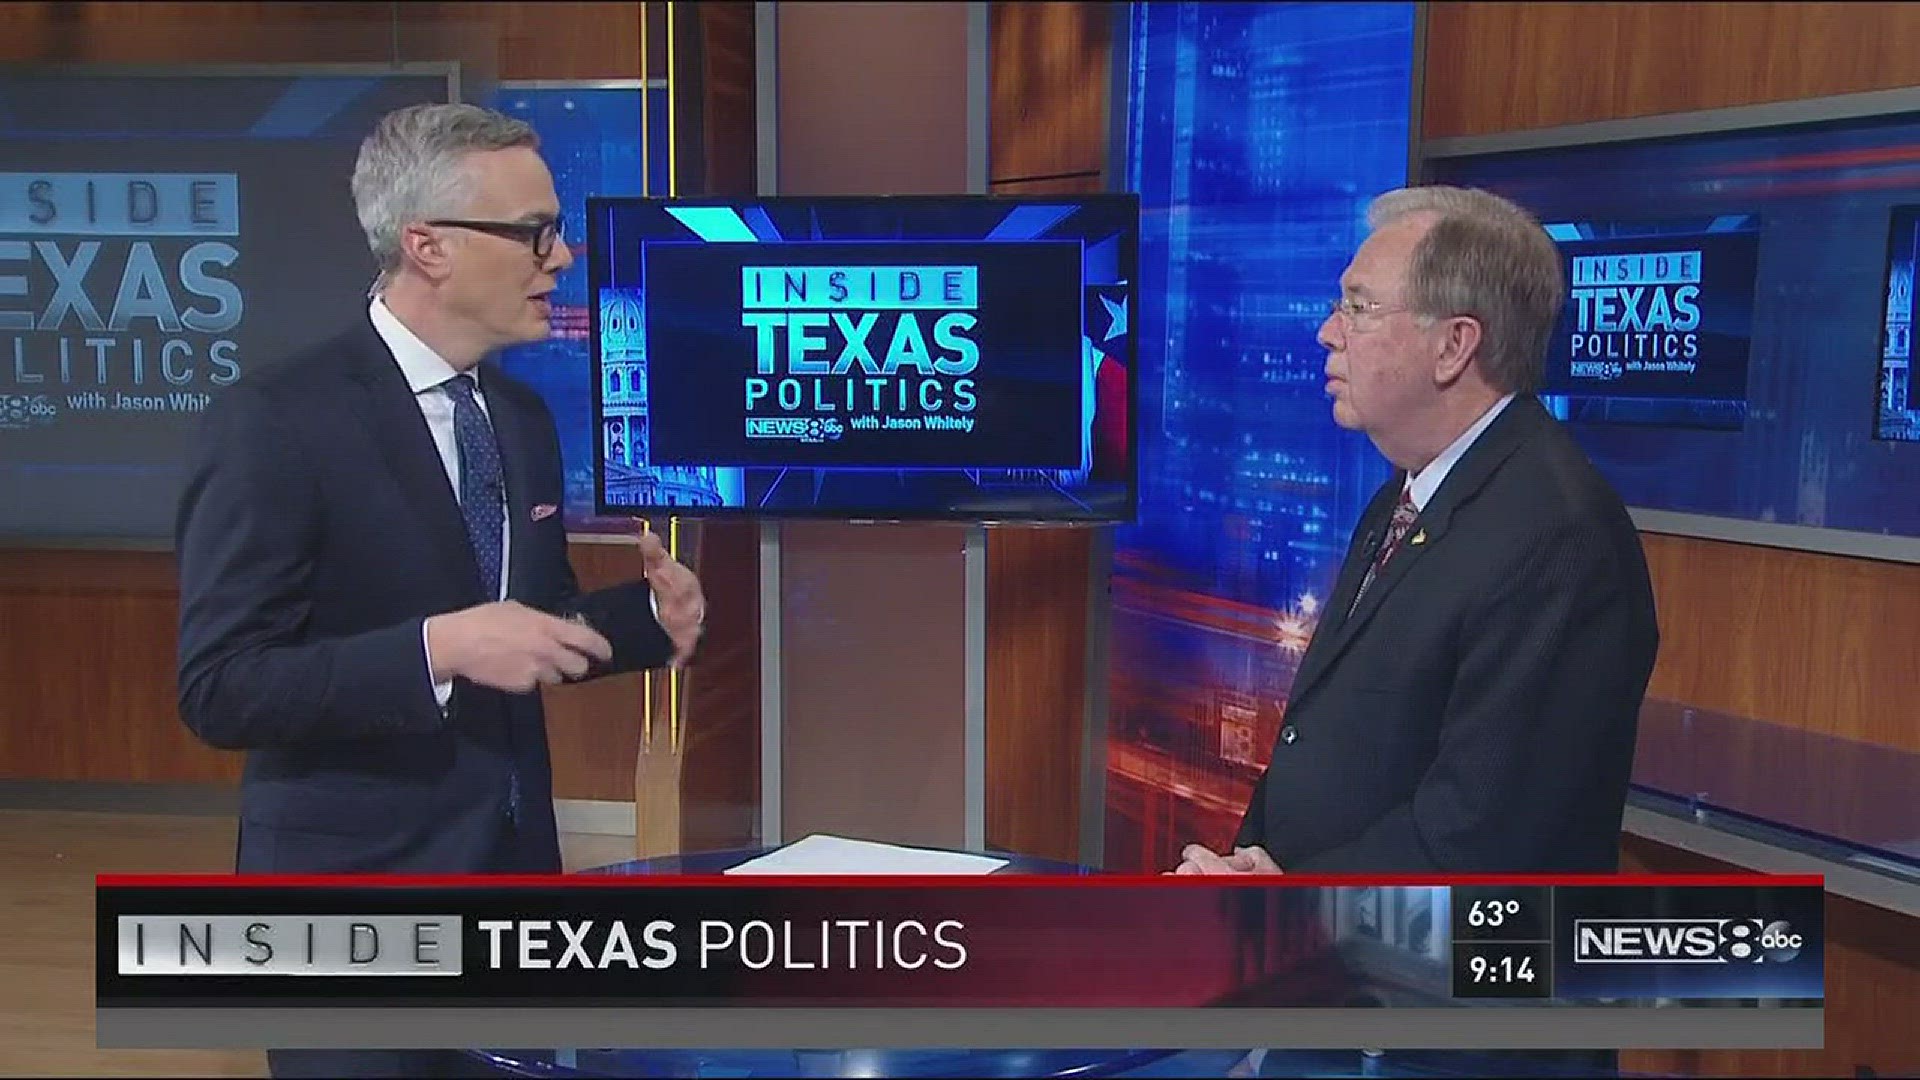 Tarrant County Judge Glen Whitley put himself in the hot seat over property taxes. He blames high rates on state legislatures. Every time Austin cuts education funding, Whitley says local governments are forced to make up the difference. He joined host Da